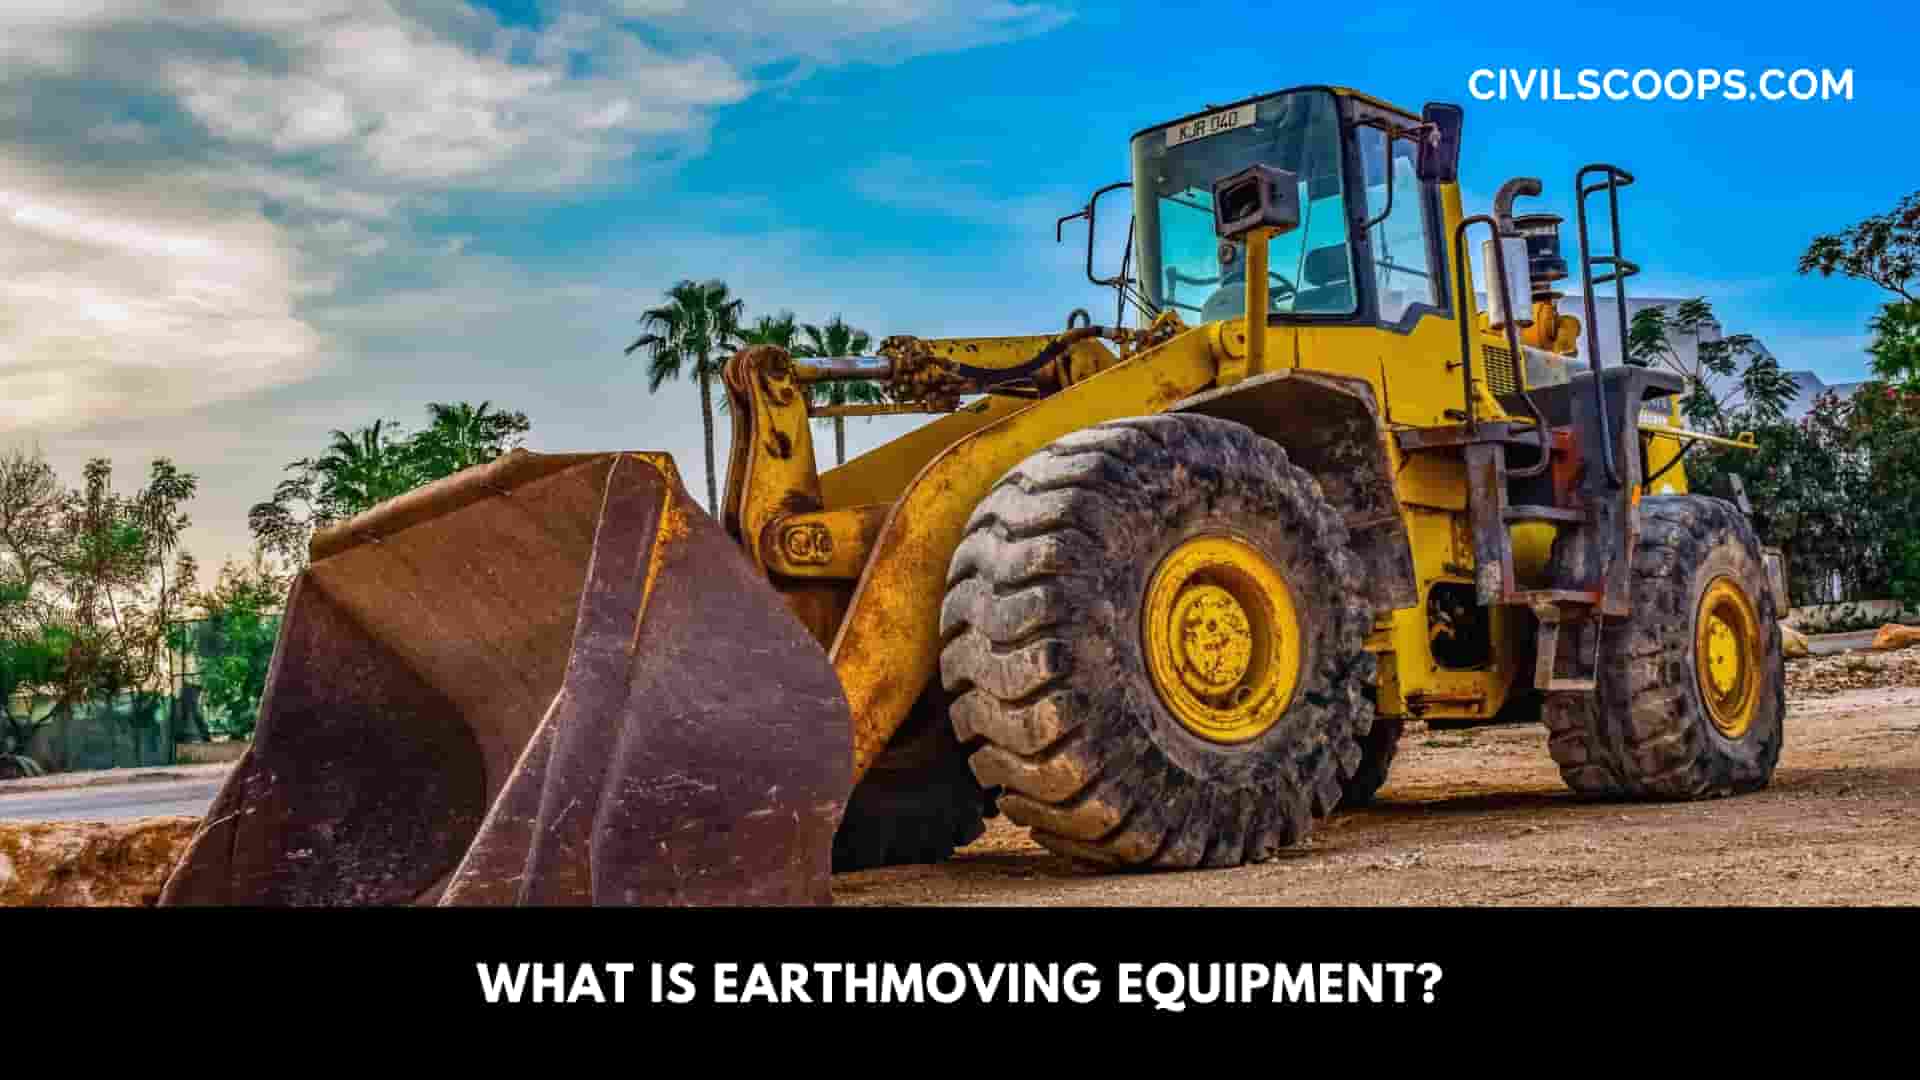 What is Earthmoving Equipment?